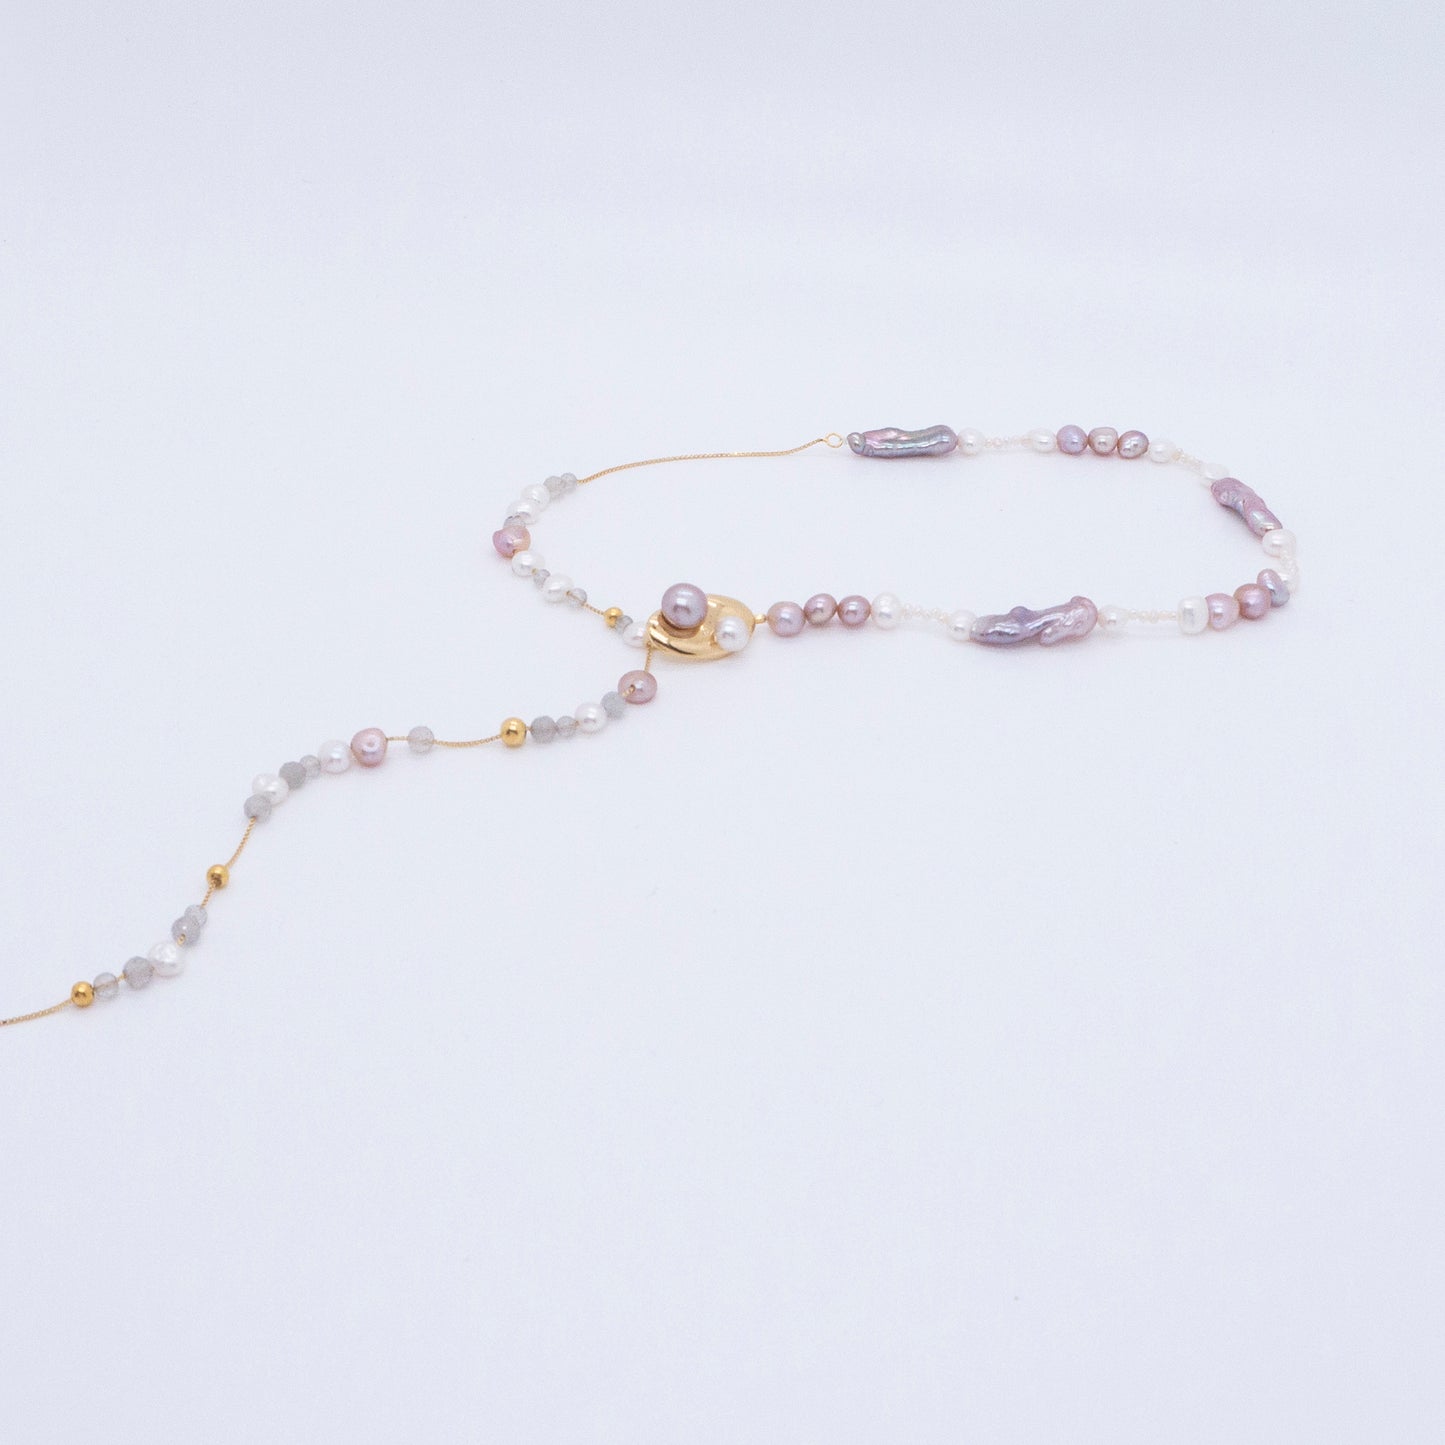 Multiverse - Parallel Universes Pearl Long Necklace (18K Gold Plated)